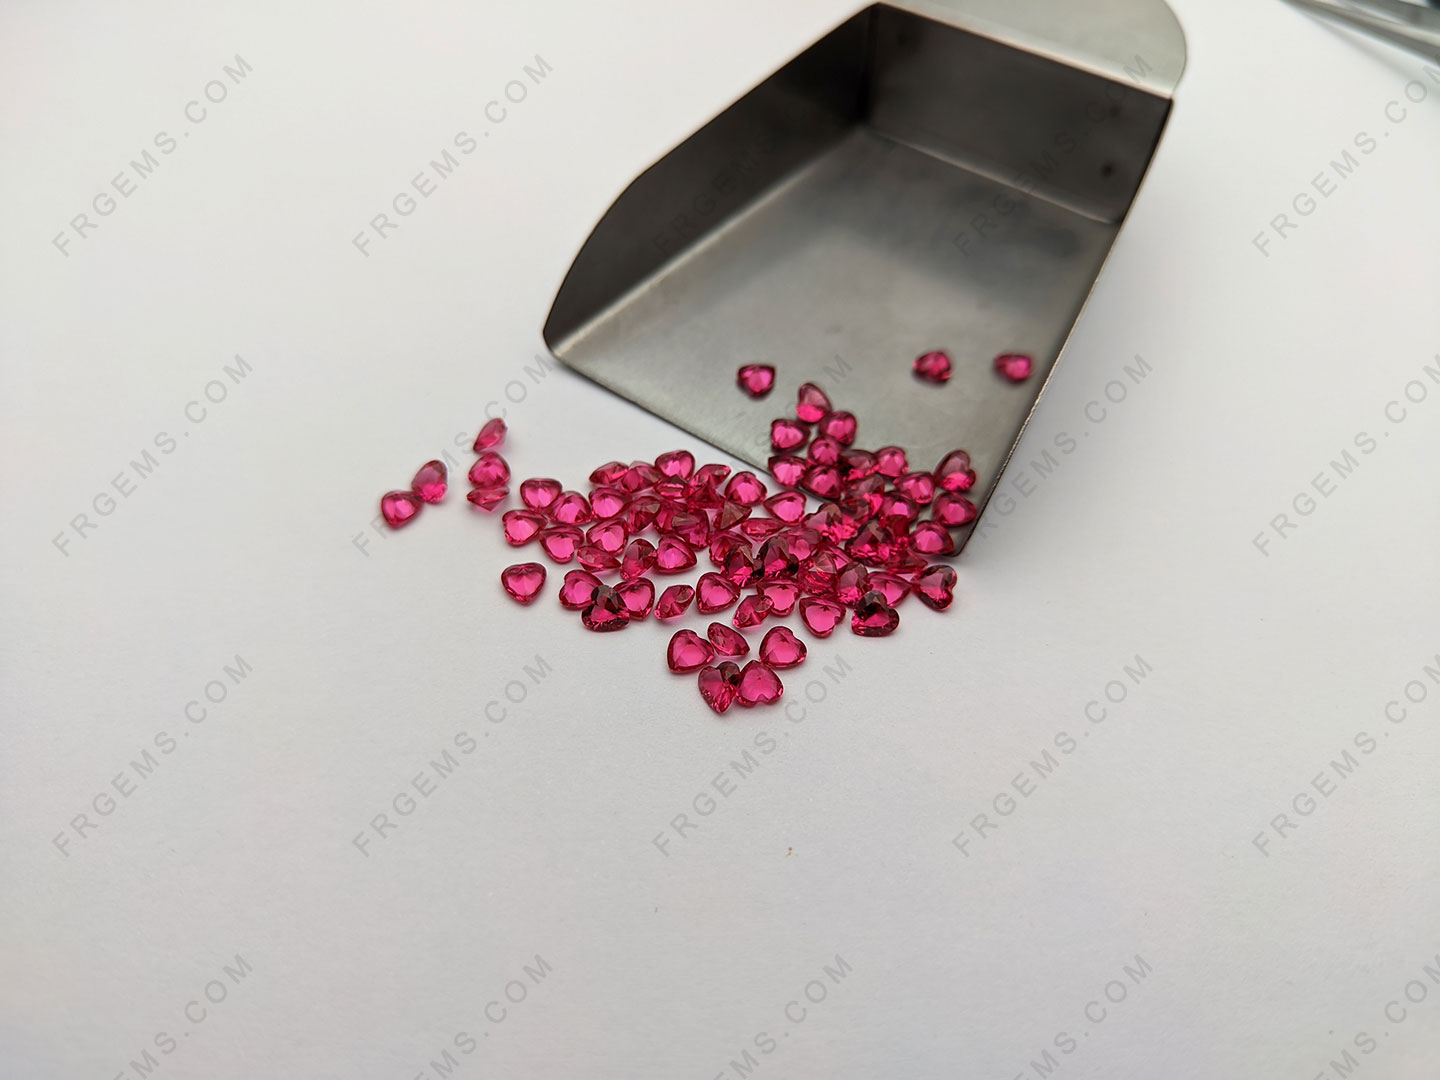 Wholesale Loose Nano Crystal Ruby Red Color 190/3# Heart shape Faceted Cut 4x4mm gemstones